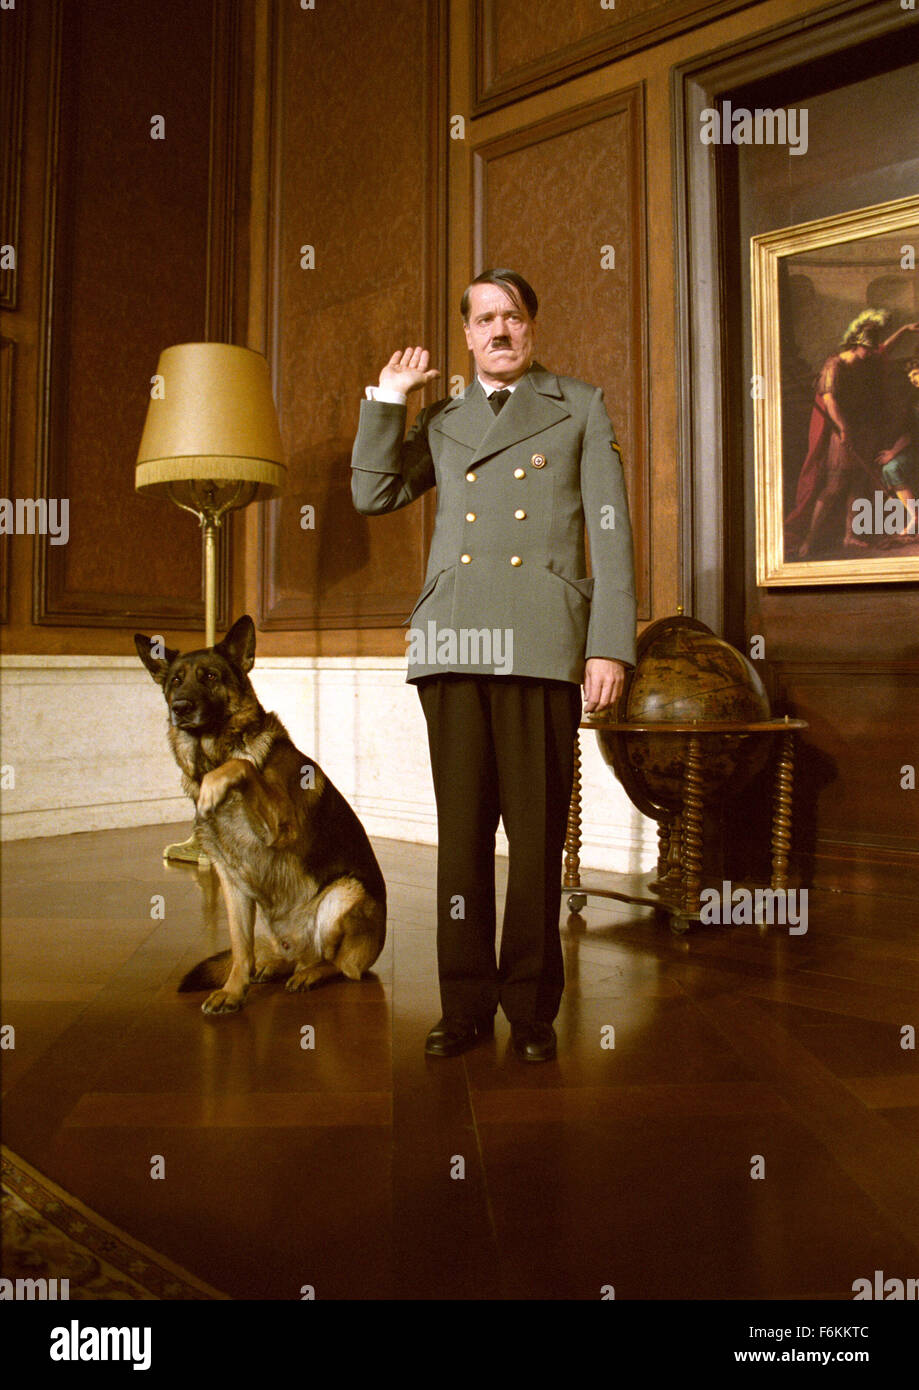 RELEASE DATE: January 11, 2007 (Germany). MOVIE TITLE: Mein FYhrer - Die wirklich wahrste Wahrheit Yber Adolf Hitler (Original) - STUDIO: X Filme/Beta Cinema. PLOT: The setting is World War II, around New Year's Eve 1944. This comedy tells the story of Adolf Hitler and his preparation for a big New Year's speech. PICTURED: HELGE SCHNEIDER as Adolf Hitler and his dog Blondi. Stock Photo